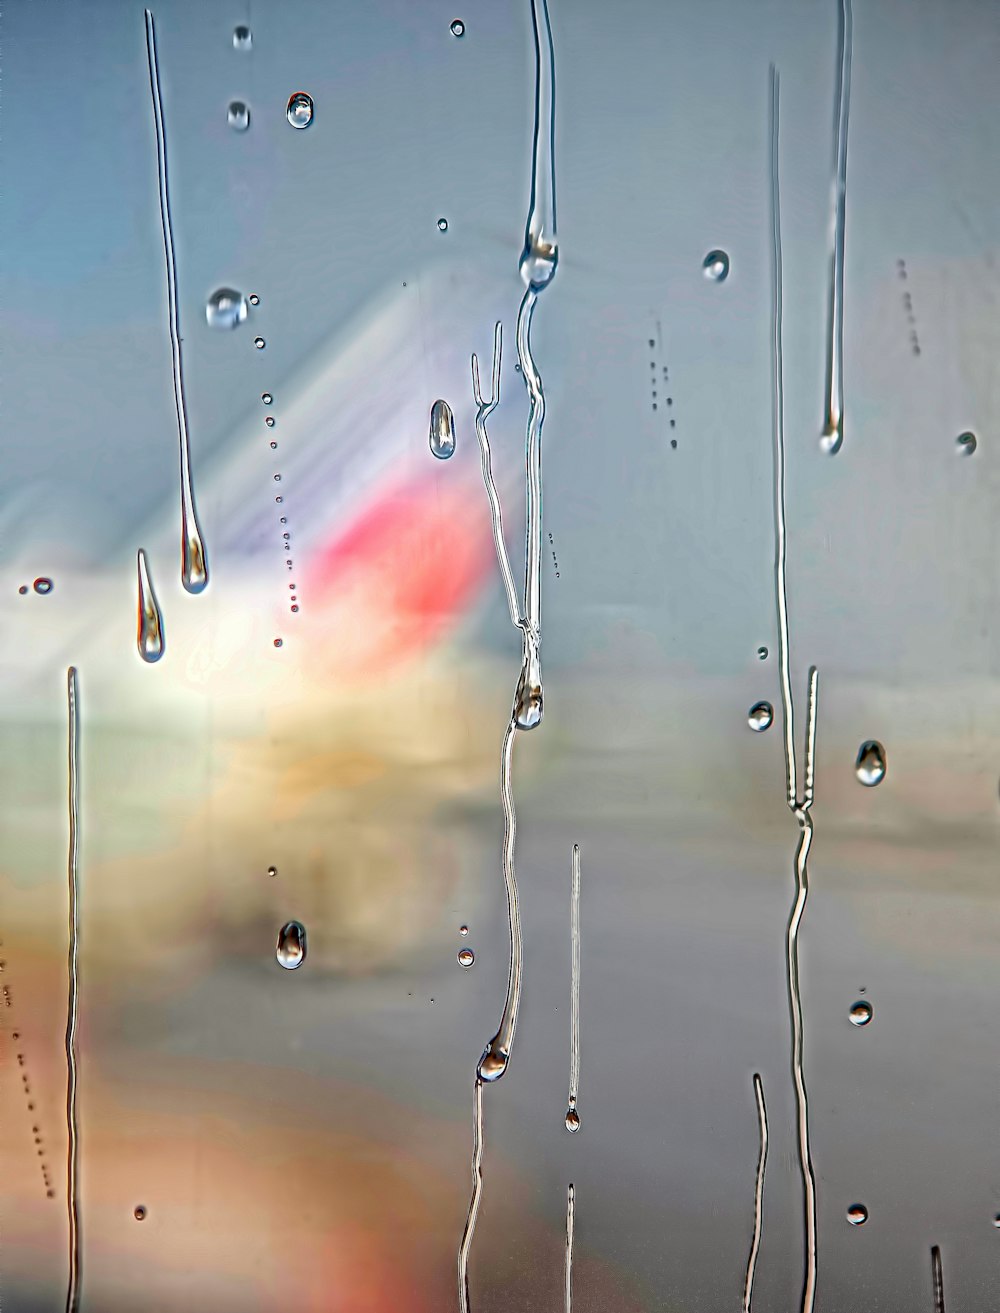 focus photography of water droplets on glass surface